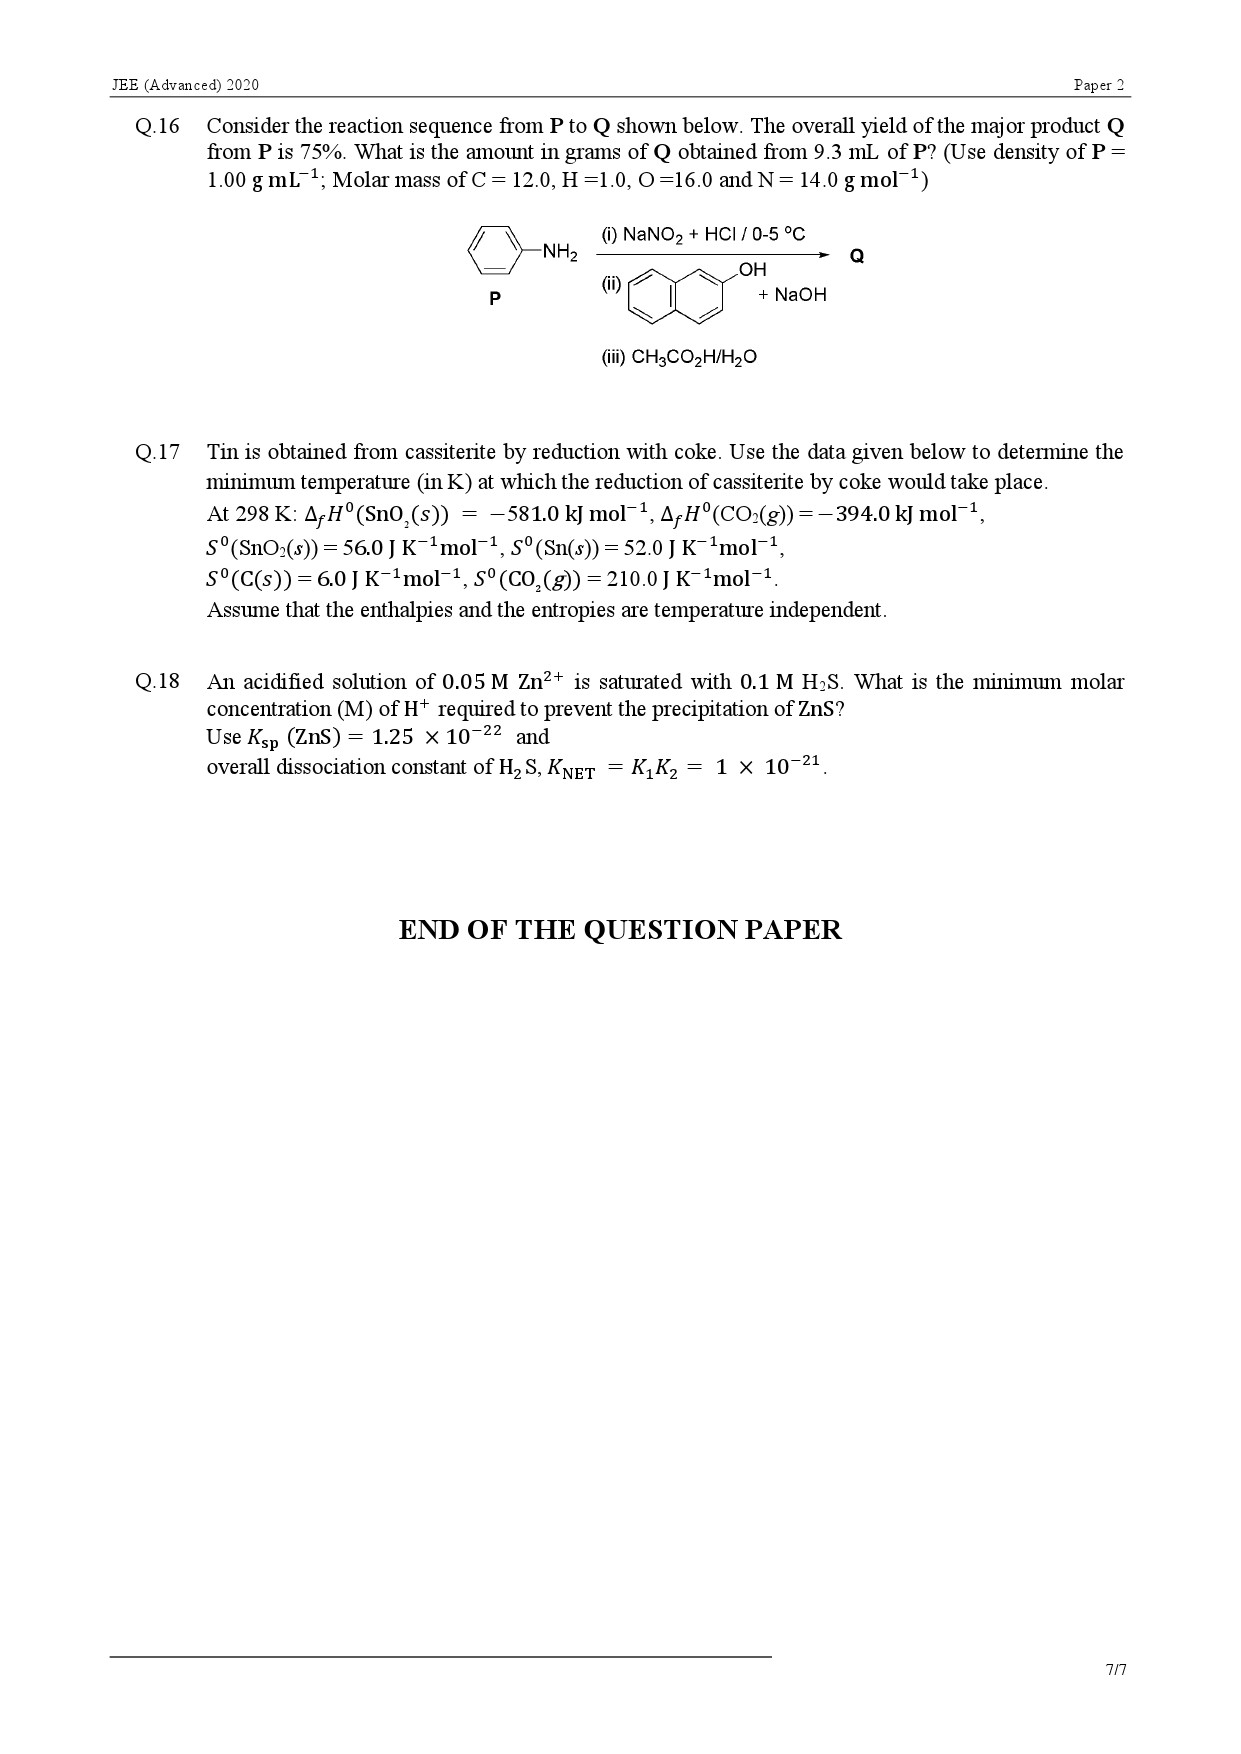 JEE Advanced Exam Question Paper 2020 Paper 2 Chemistry 7